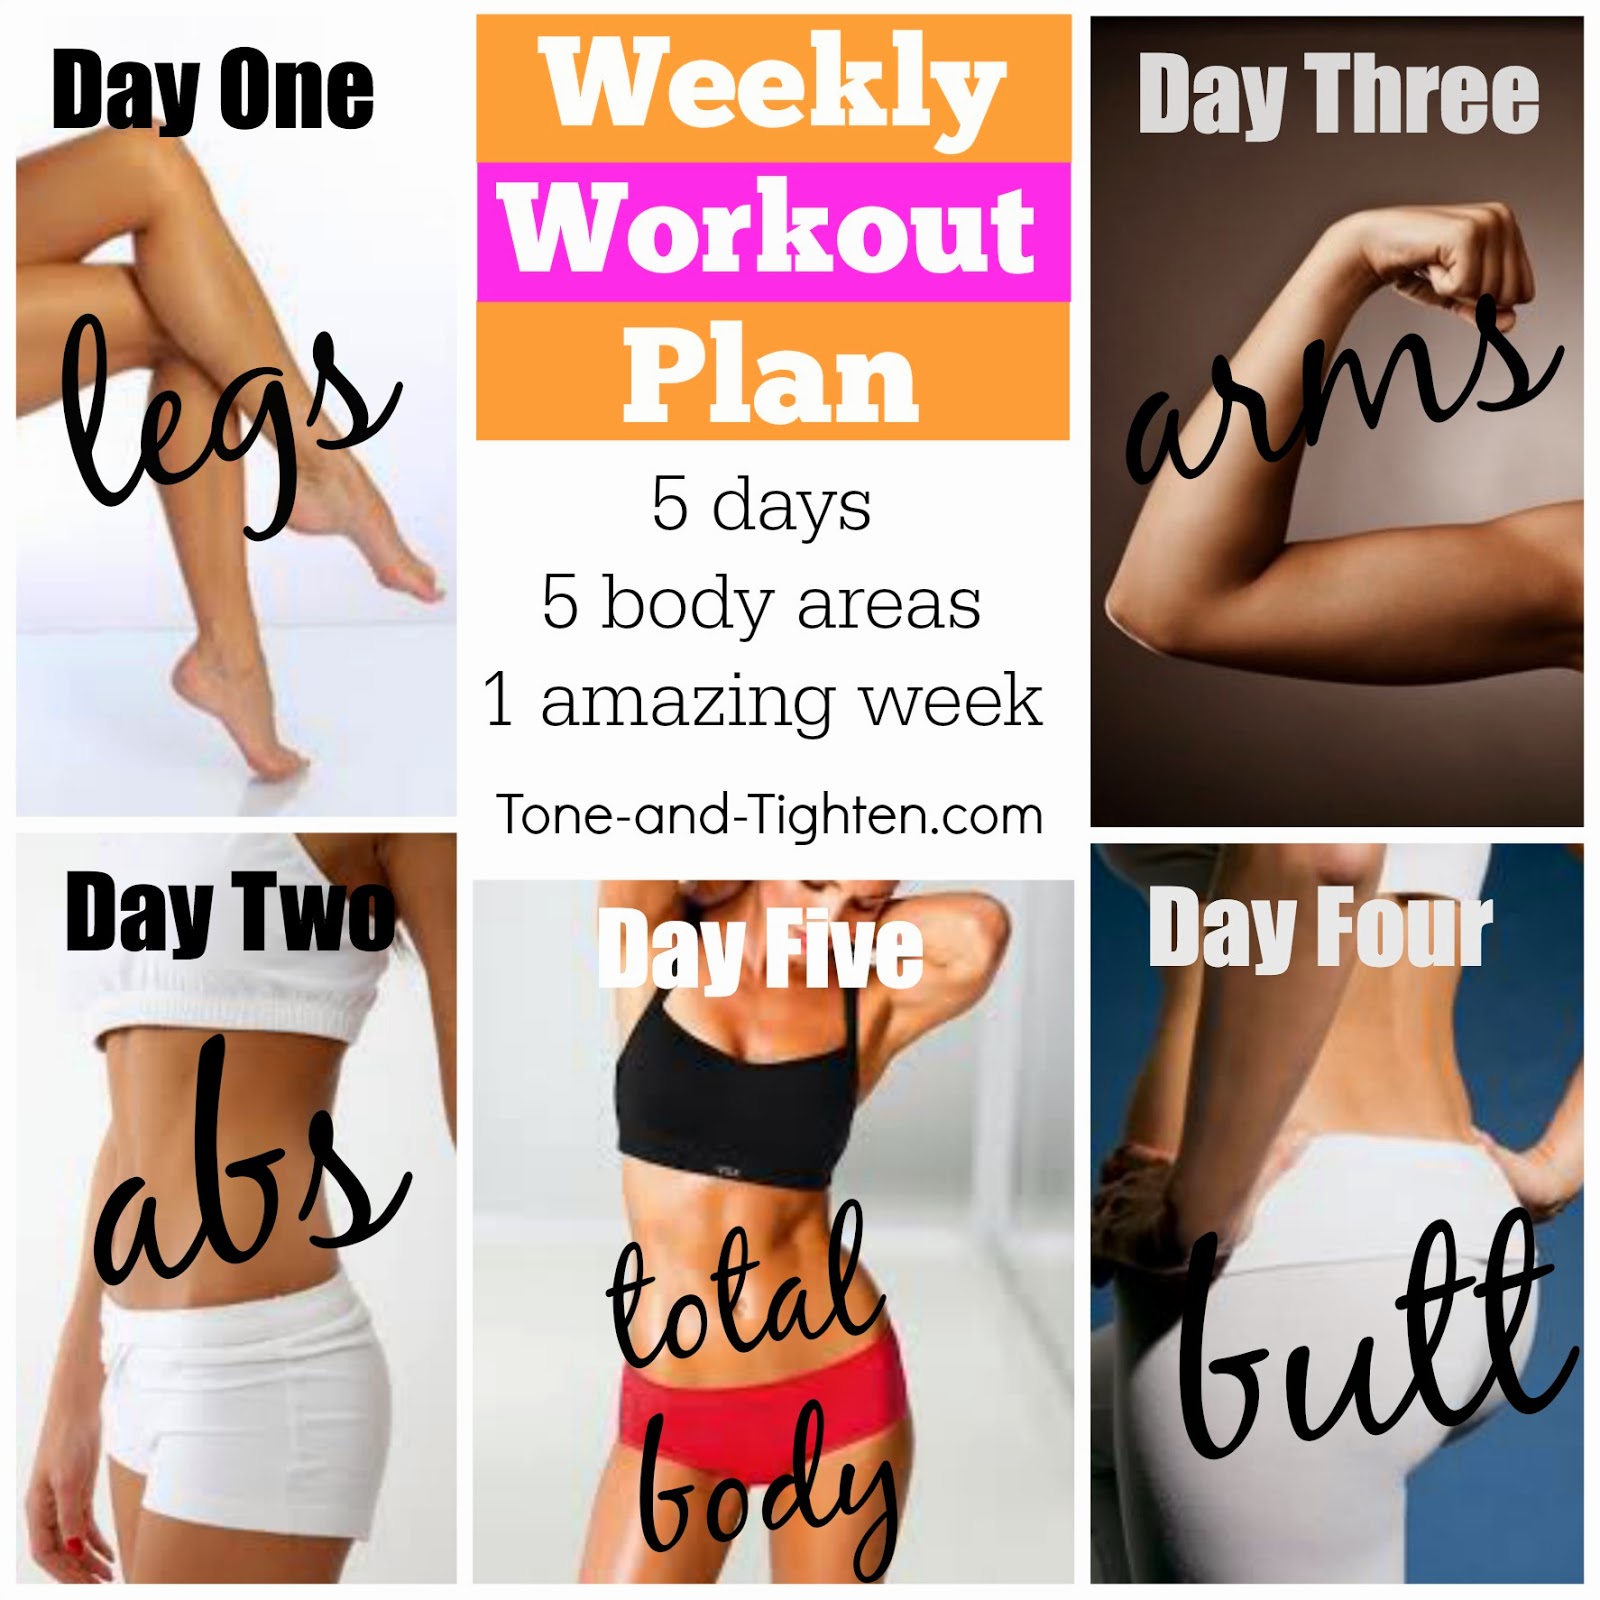 Weekly Workout Plan – 5 days of workouts to get you through your week